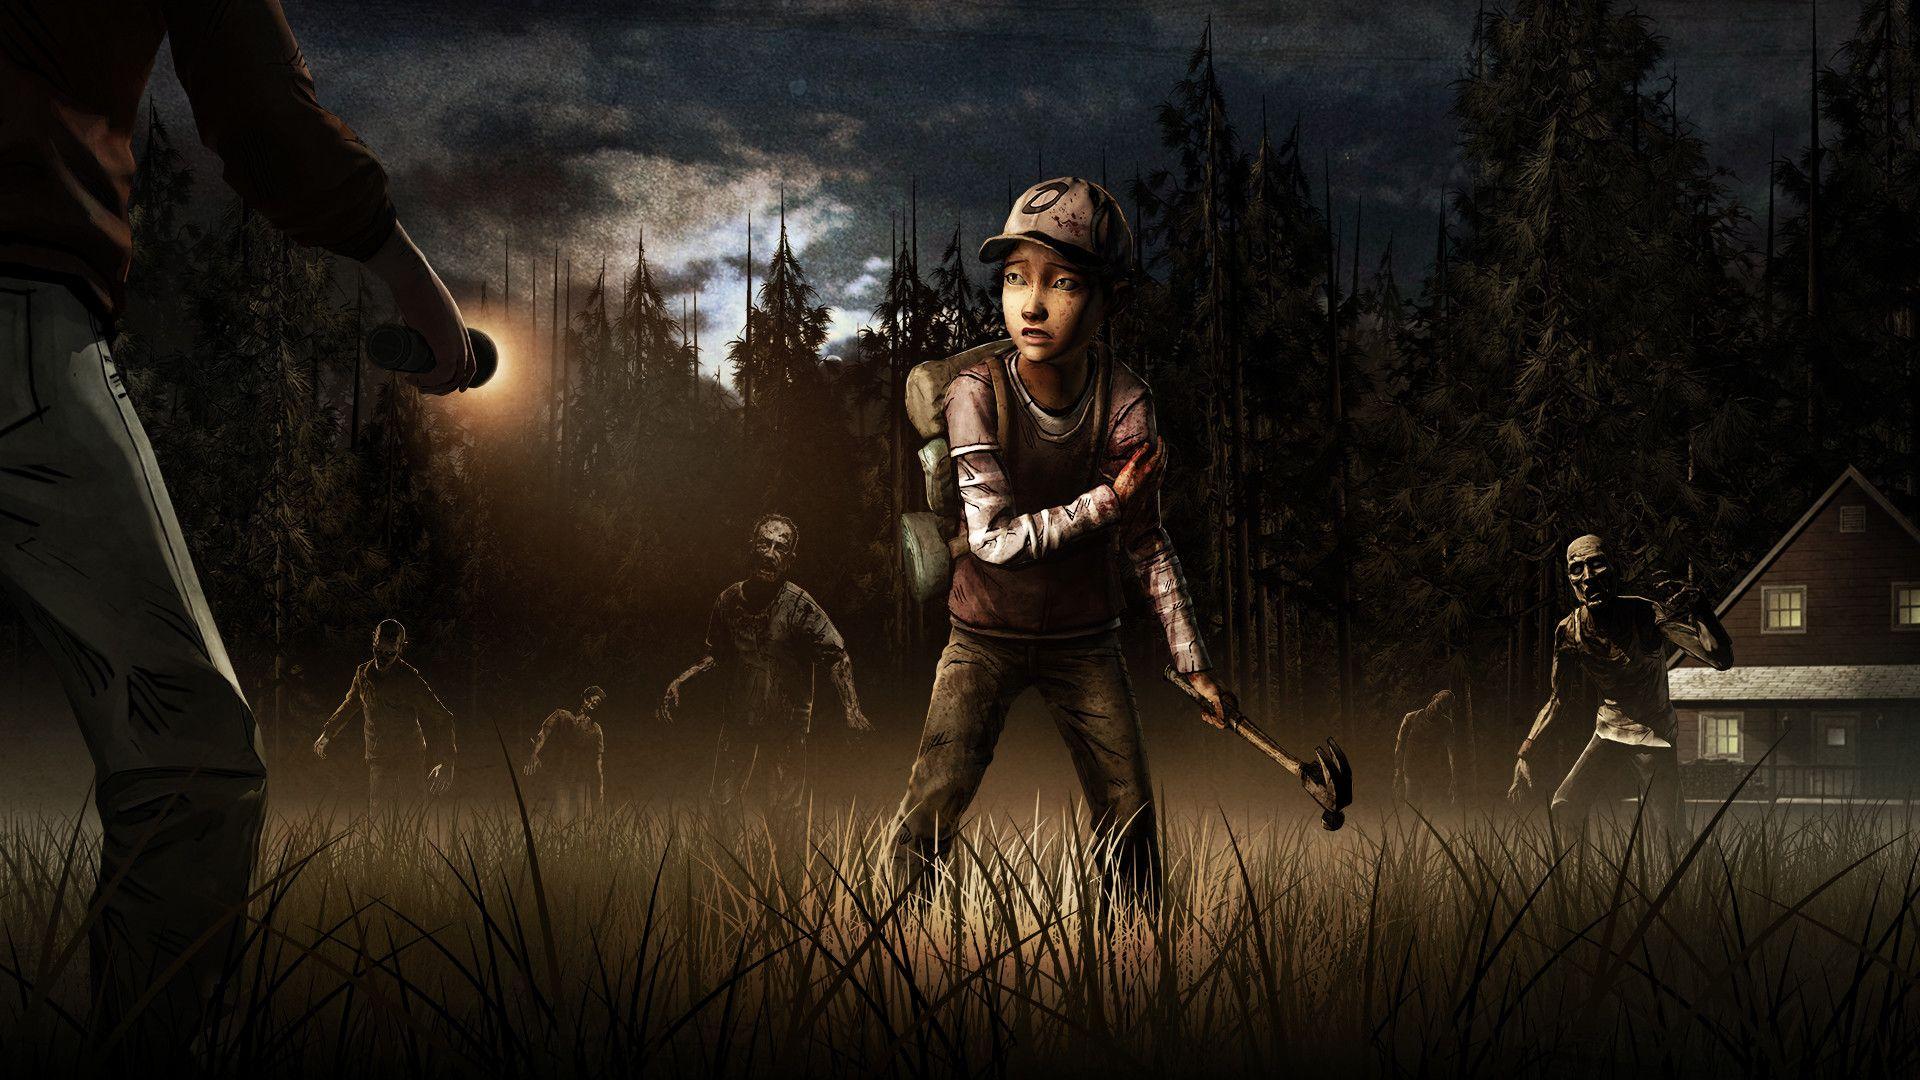 The Walking Dead Game Wallpaper background picture